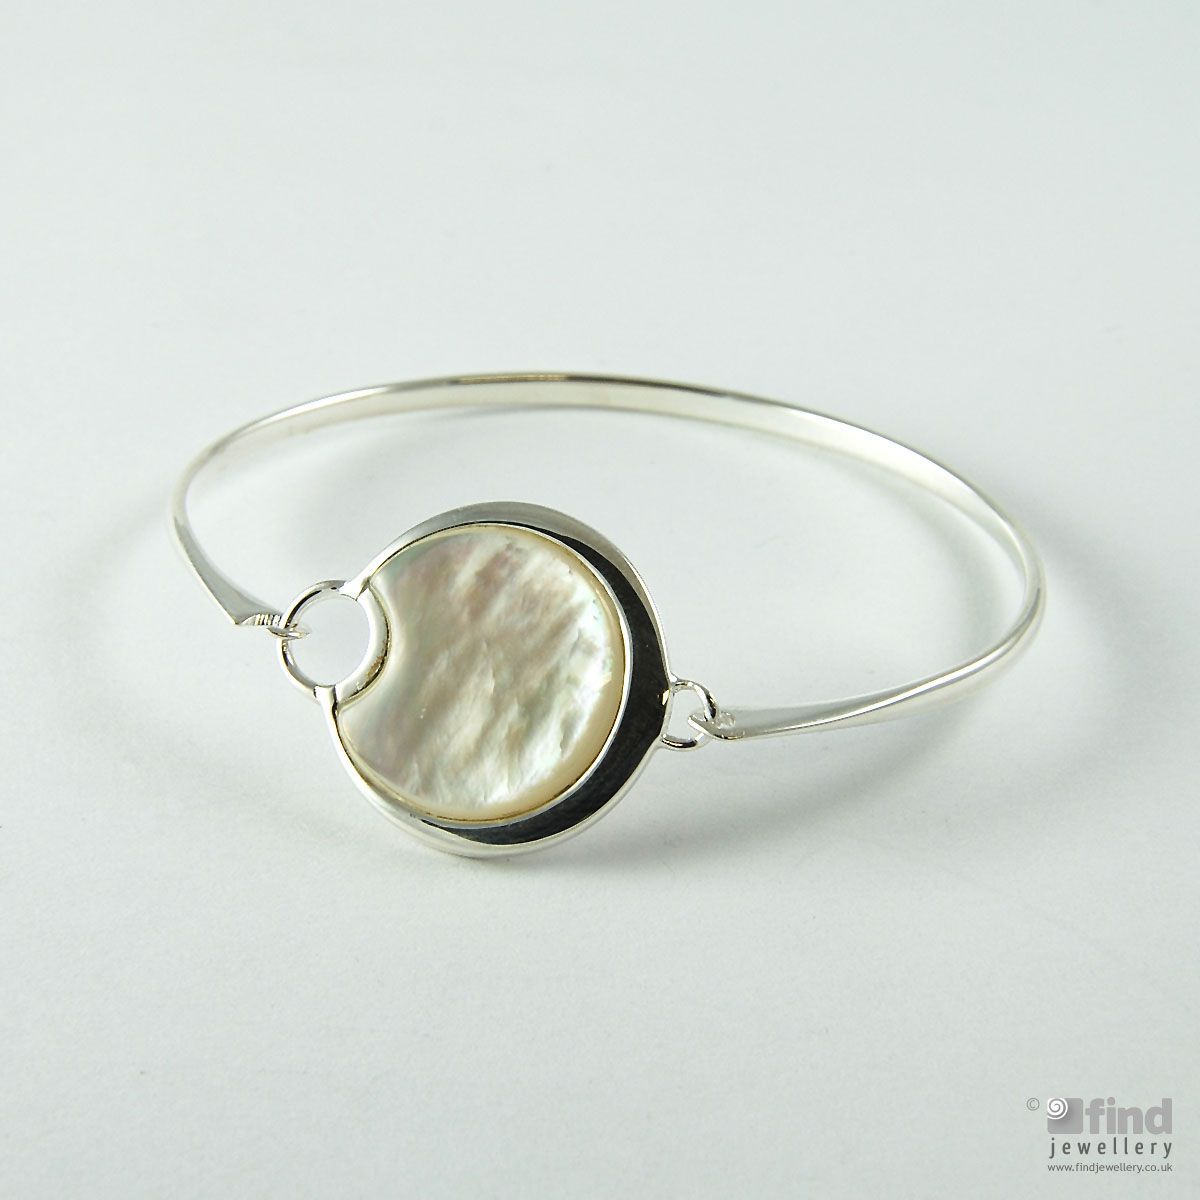 Kit Heath Dew Sterling Silver Eclipse Mother of Pearl Bangle